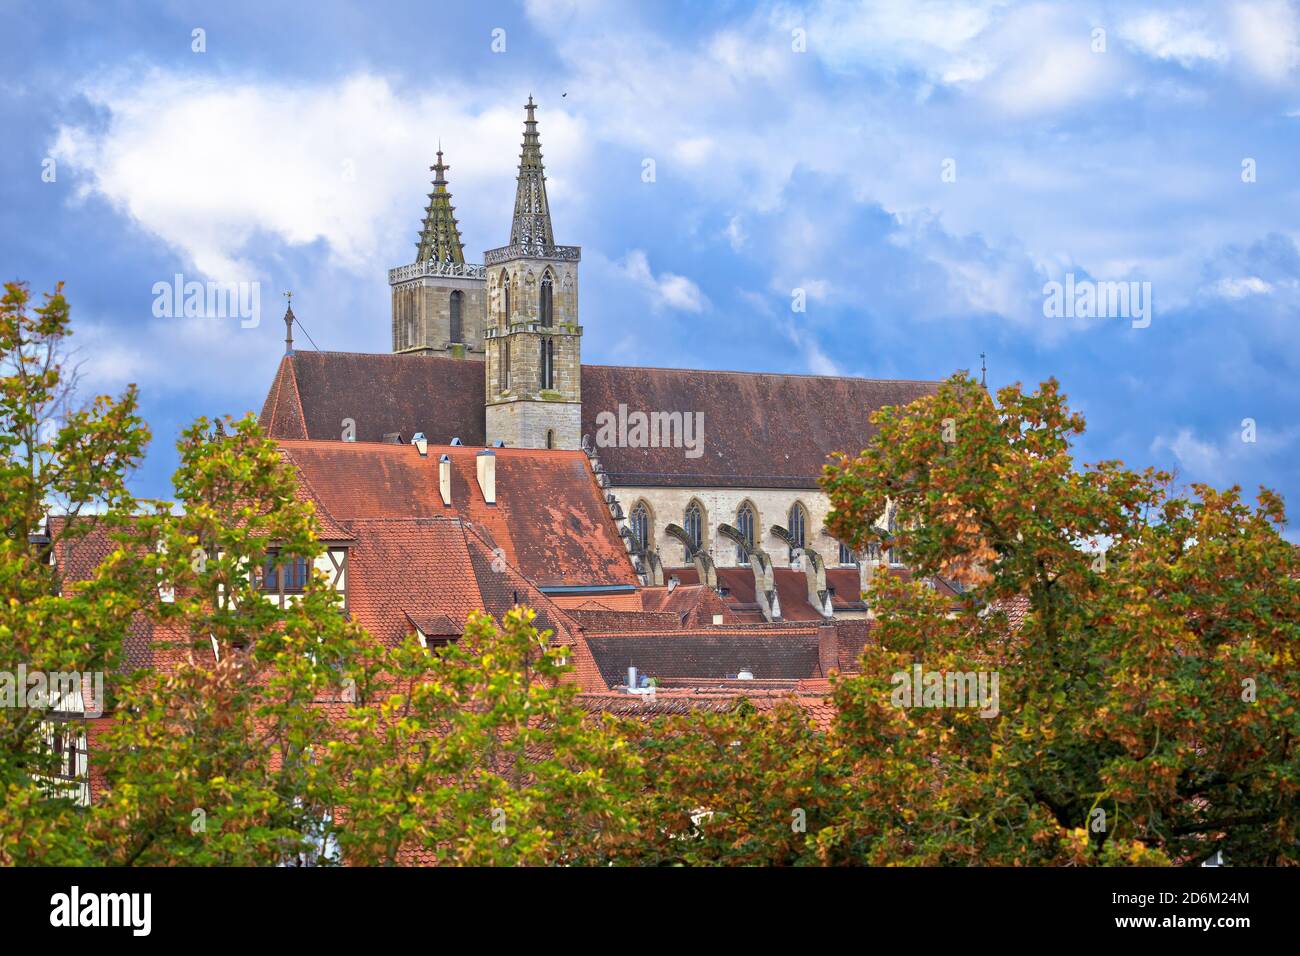 Rothenburg ob der Tauber. Cathedral in historic town of Rothenburg ob der Tauber view, Romantic road of Bavaria region of Germany Stock Photo